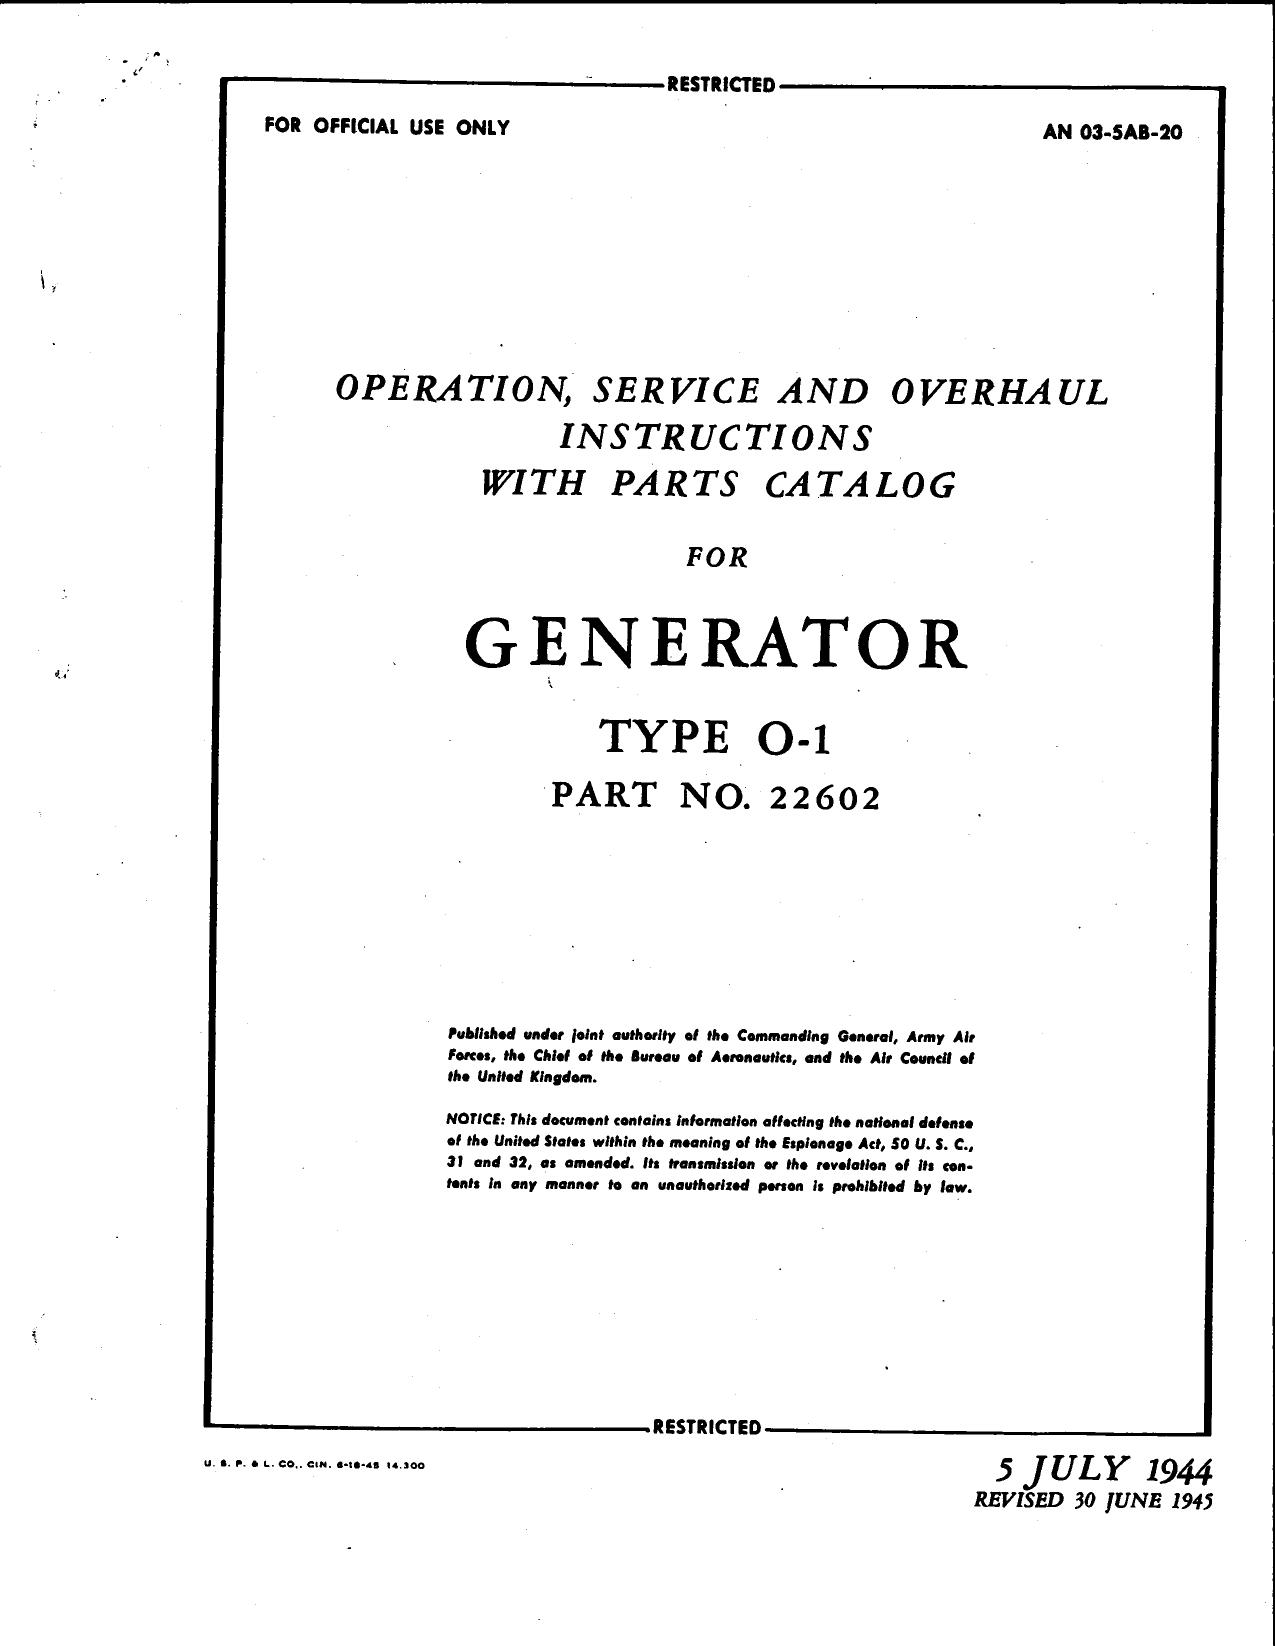 Sample page 3 from AirCorps Library document: Overhaul Instructions with Parts Catalog for Generator Type O-1